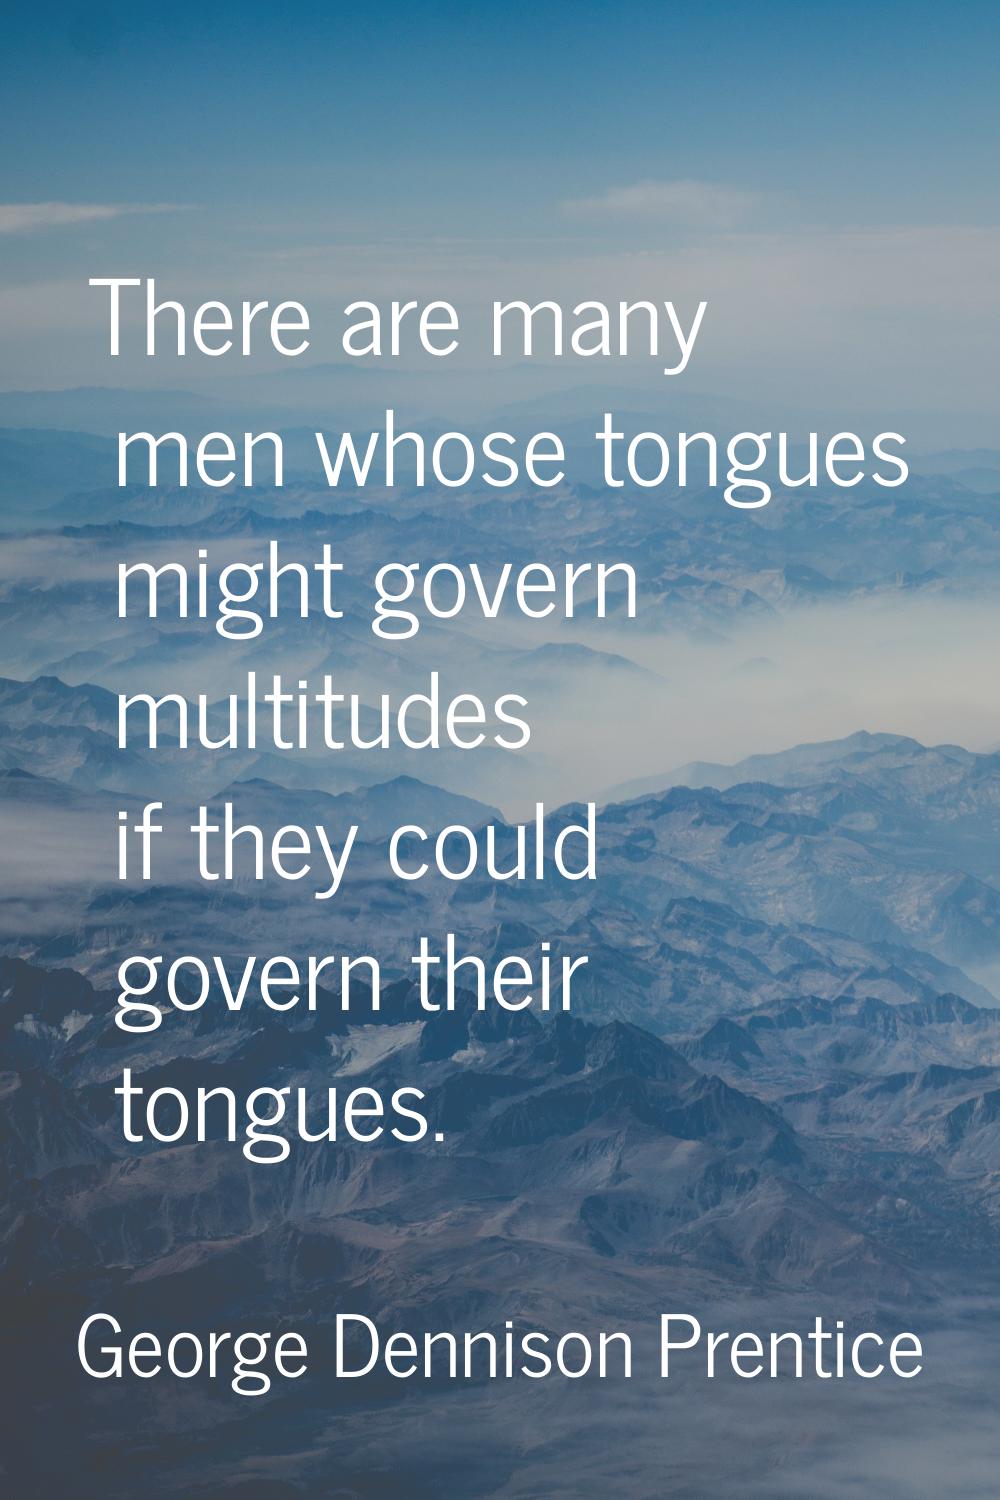 There are many men whose tongues might govern multitudes if they could govern their tongues.